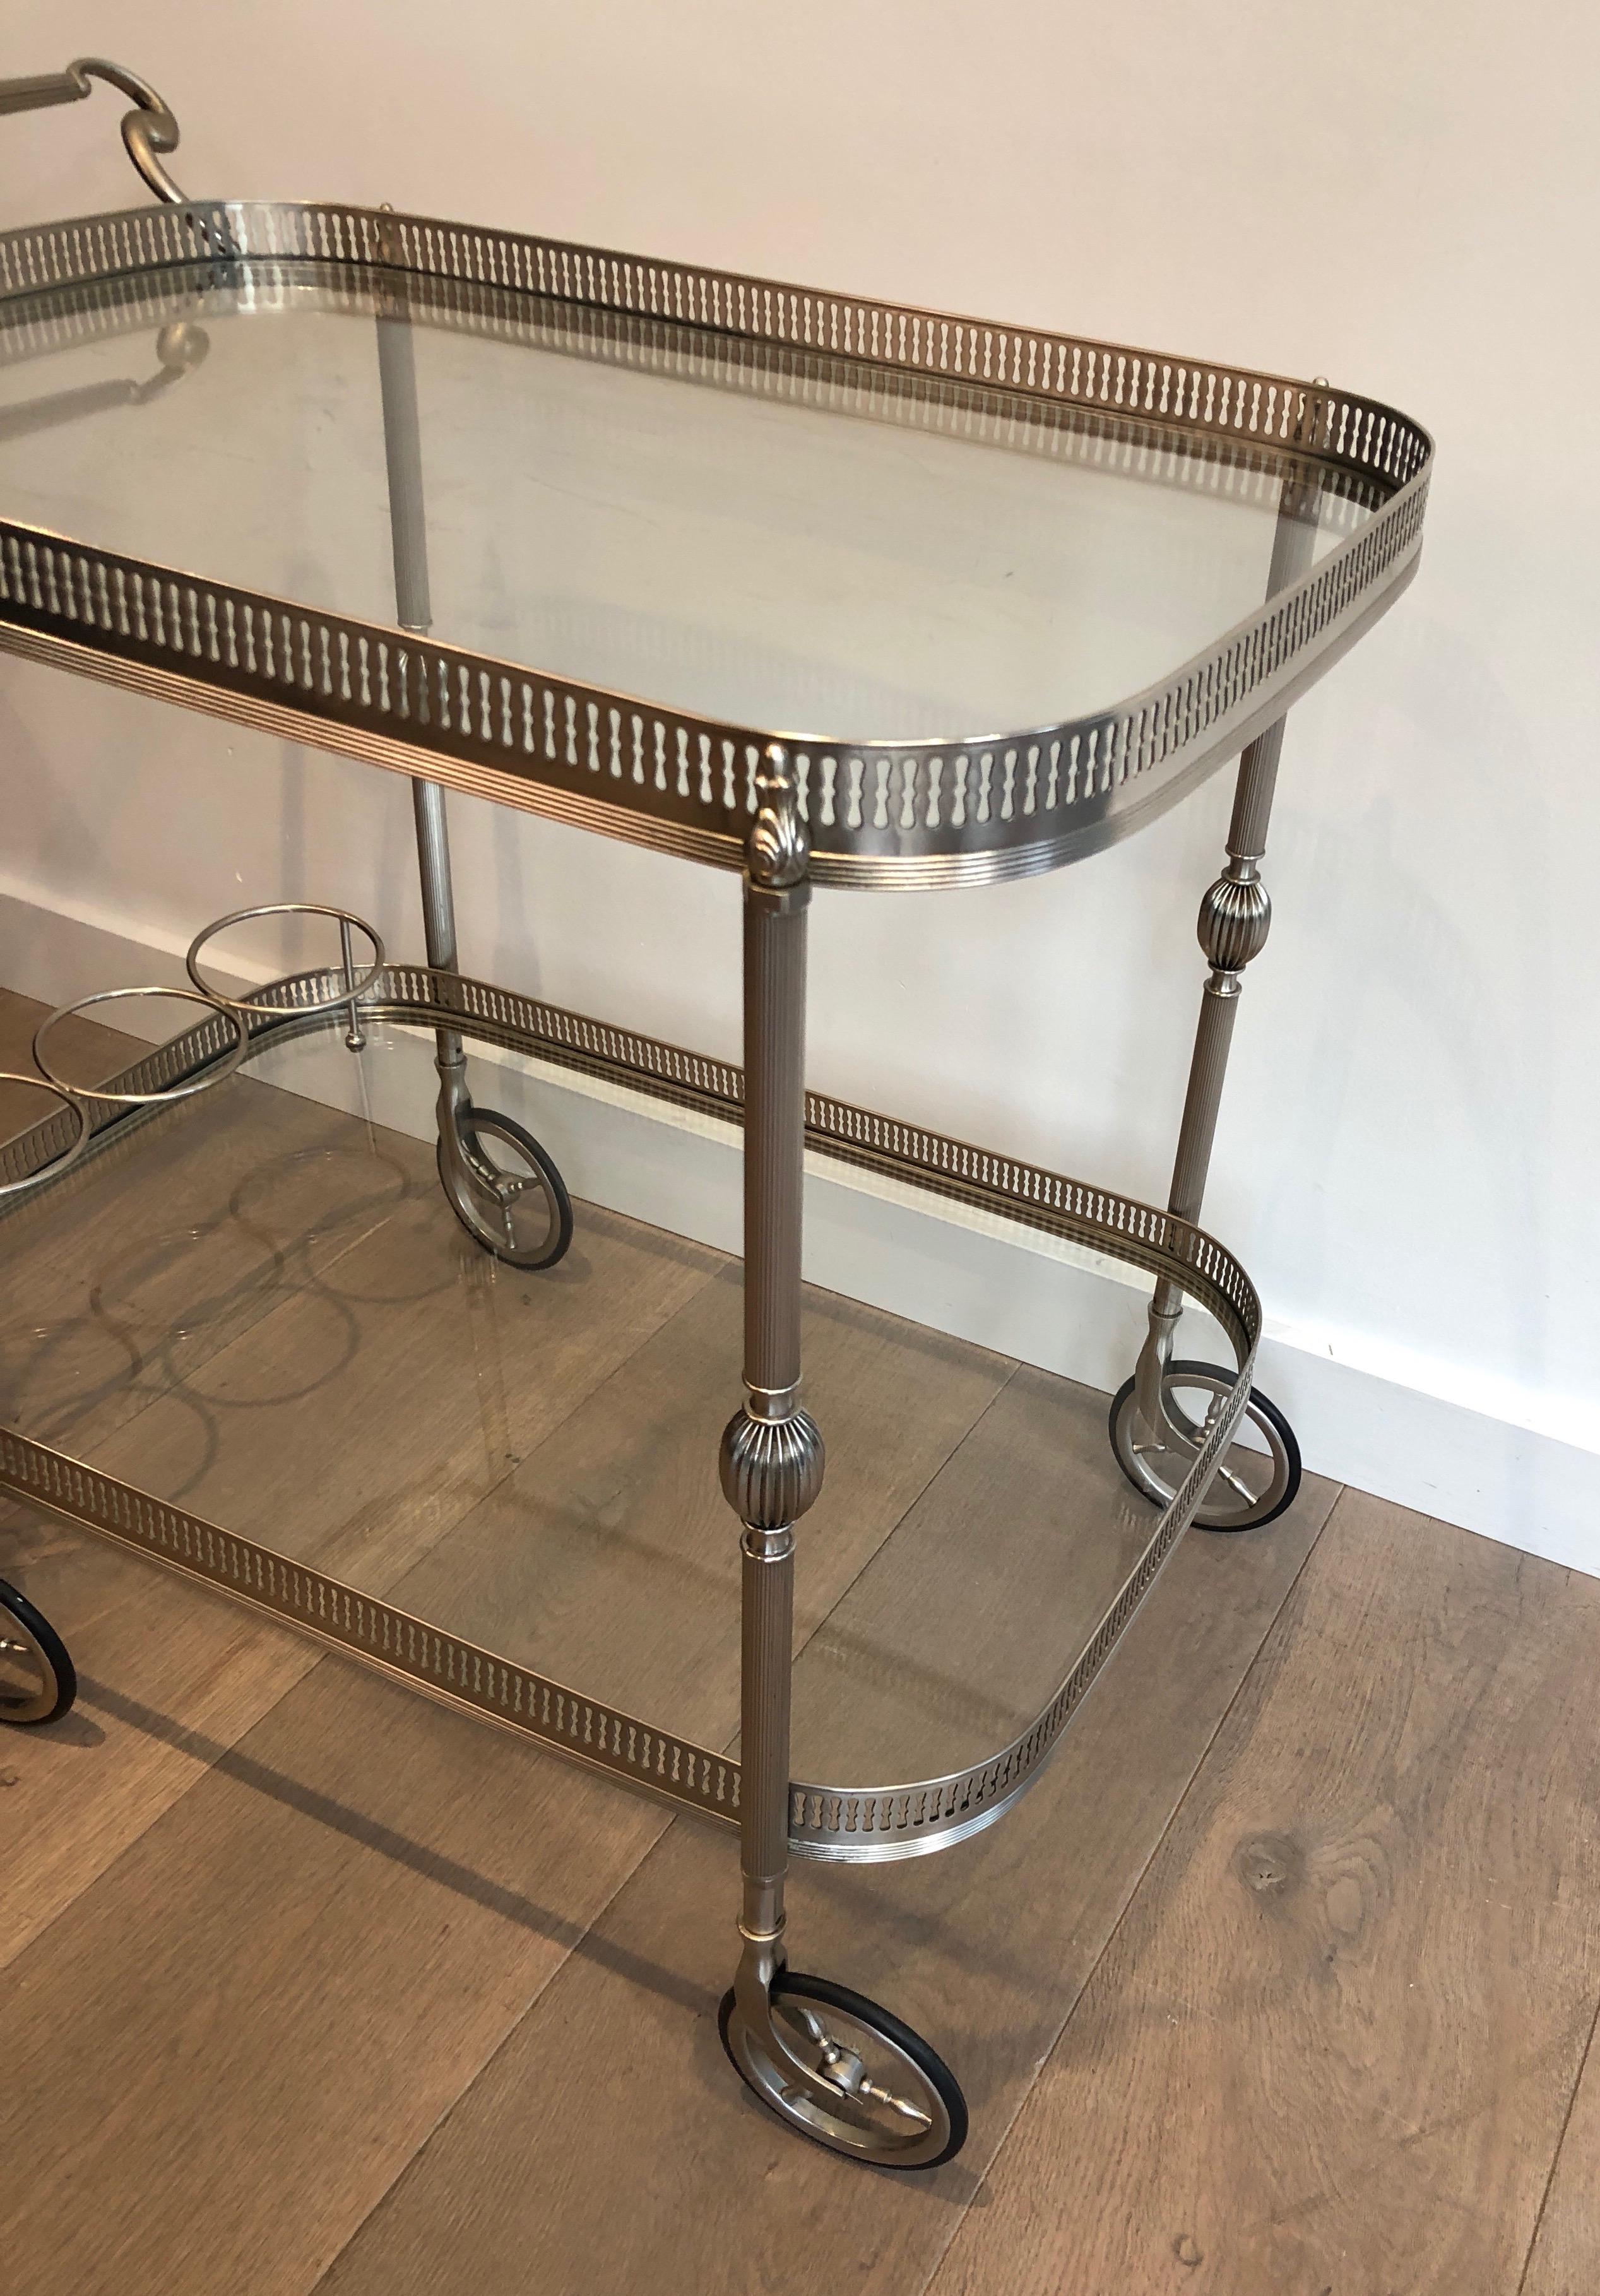 Mid-20th Century Neoclassical Silvered Brass Drinks Trolley in the Style of Maison Jansen. French